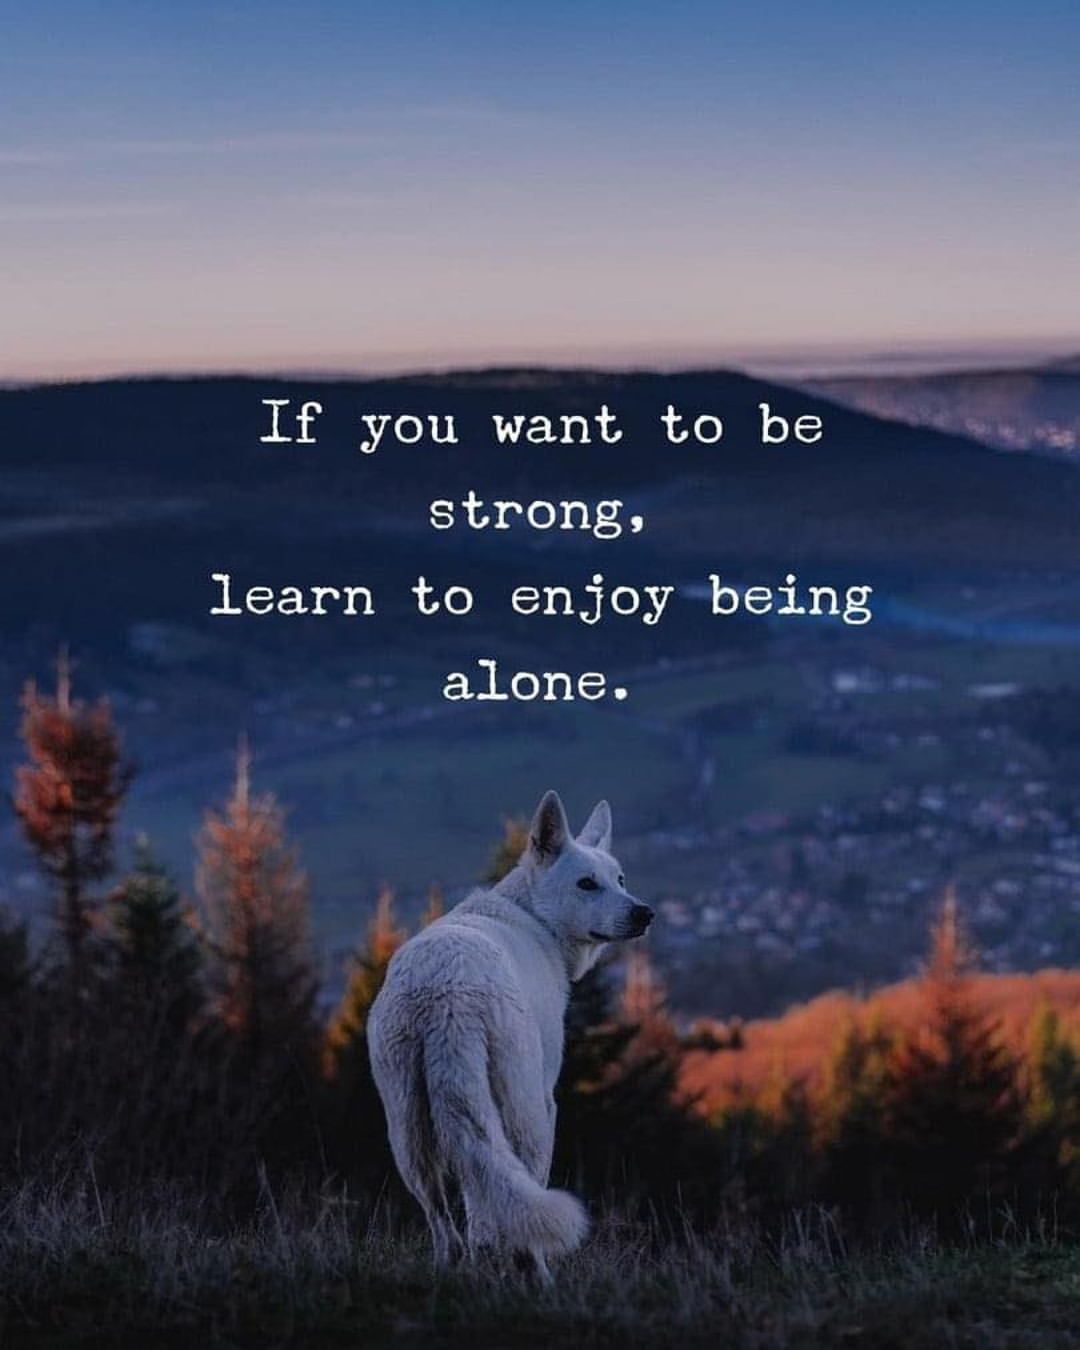 If you want to be strong, learn to enjoy being alone.